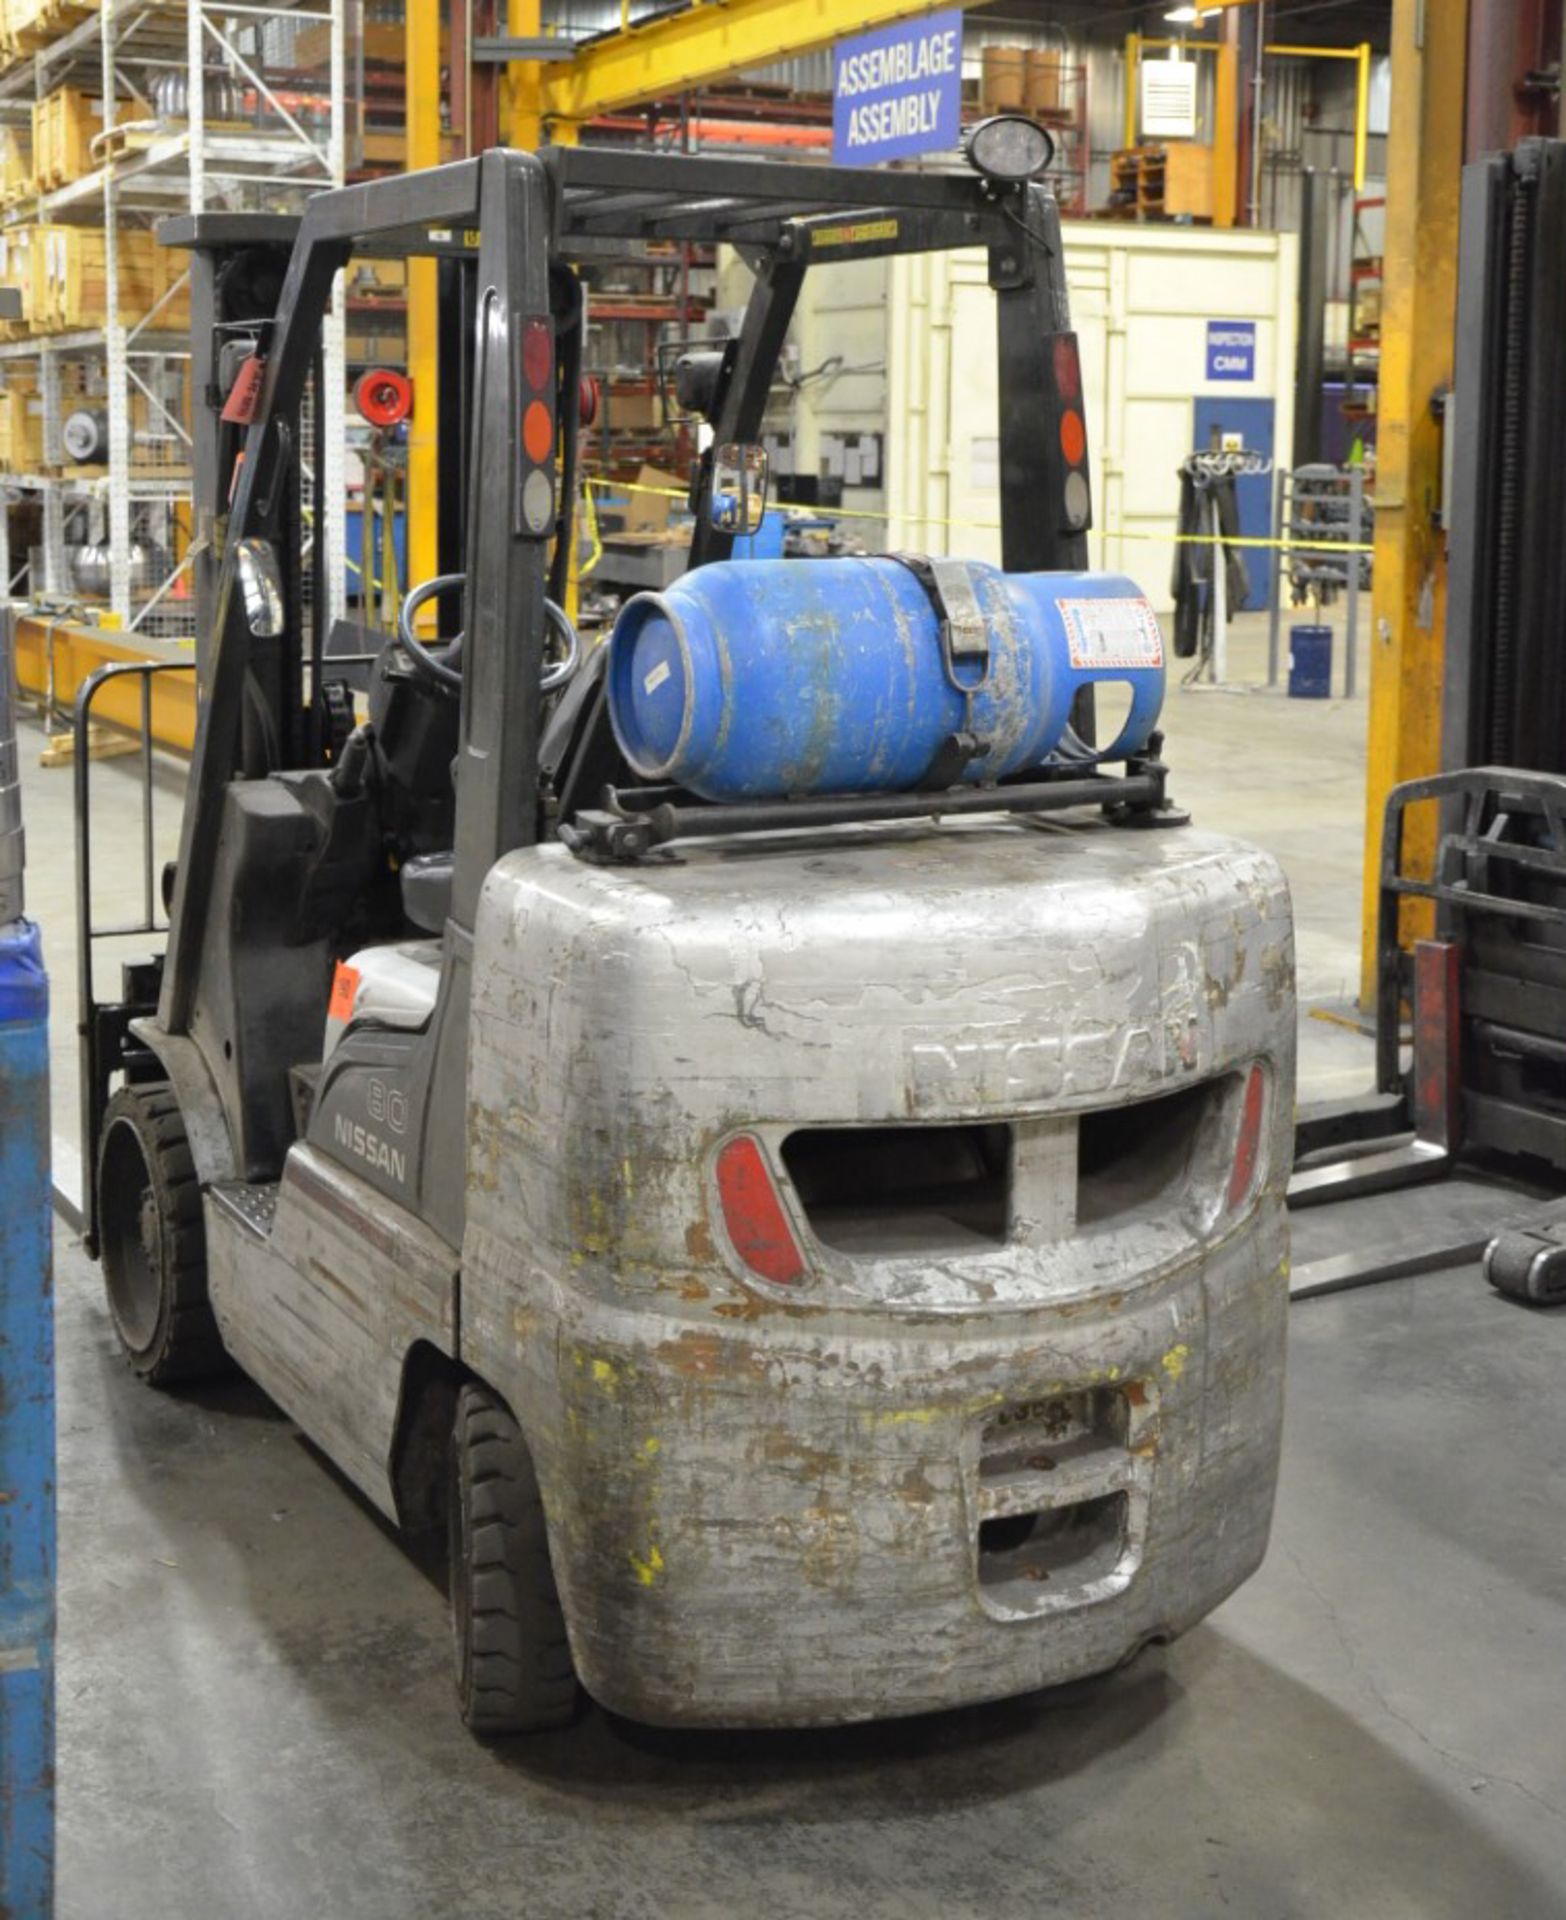 NISSAN CP 5,350 LBS CAPACITY LPG FORKLIFT WITH 169” MAX VERTICAL REACH, S/N N/A - Image 3 of 7